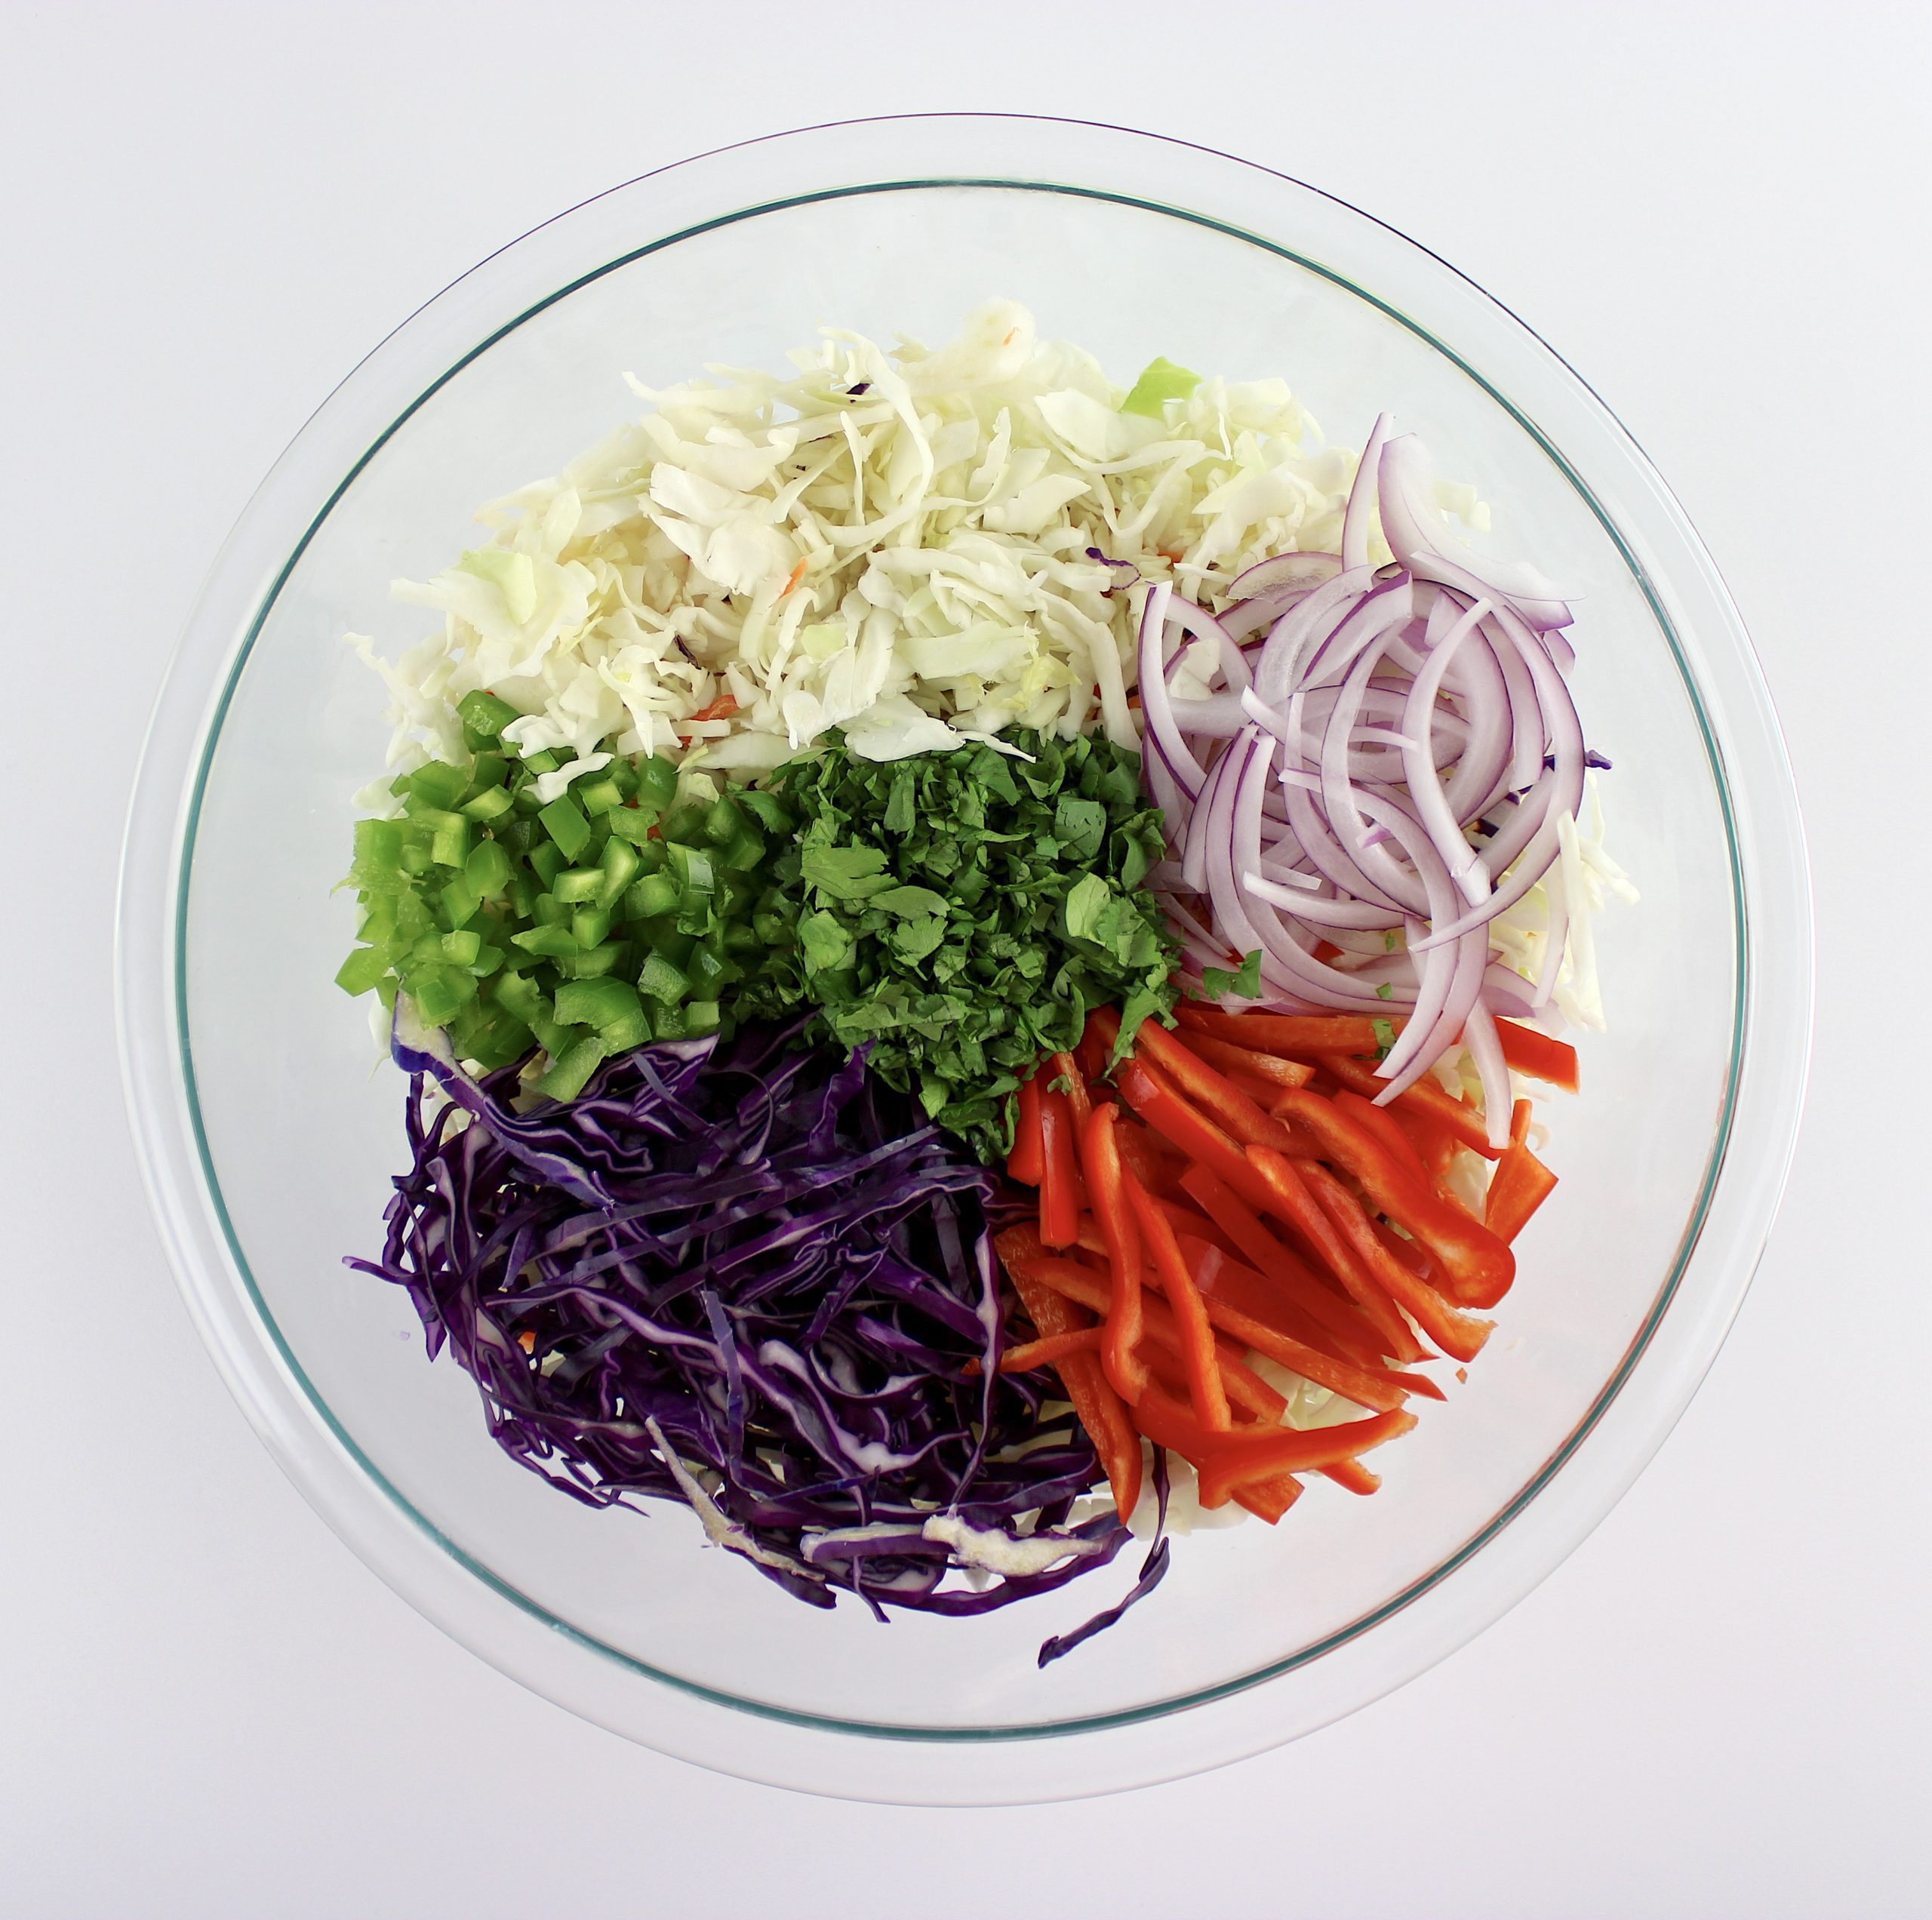 coleslaw mix, shredded red cabbage, sliced red bell pepper, cilantro, jalapeno peppers and sliced red onions in glass bowl unmixed